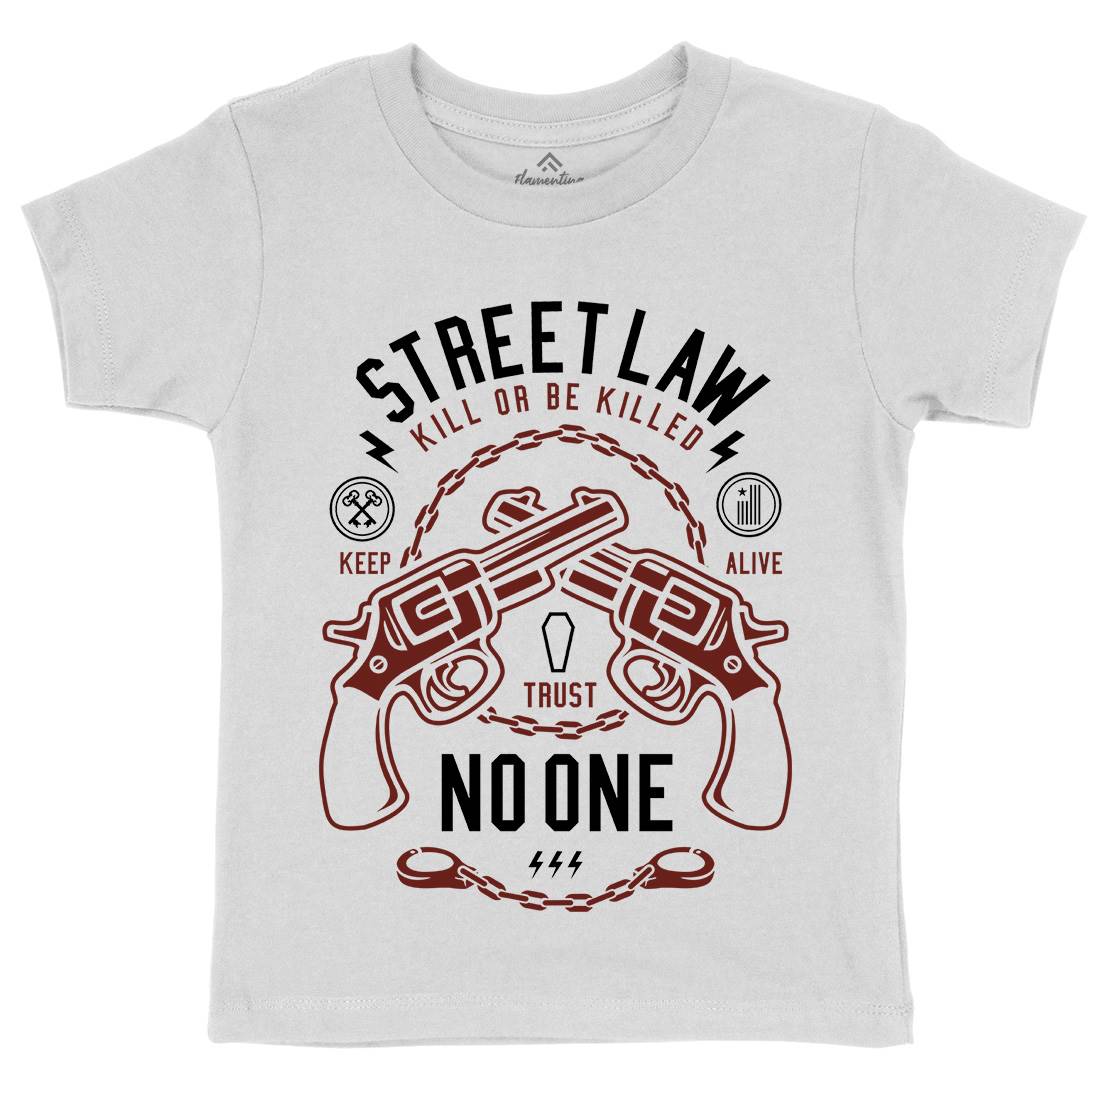 Street Law Kids Crew Neck T-Shirt Quotes A286